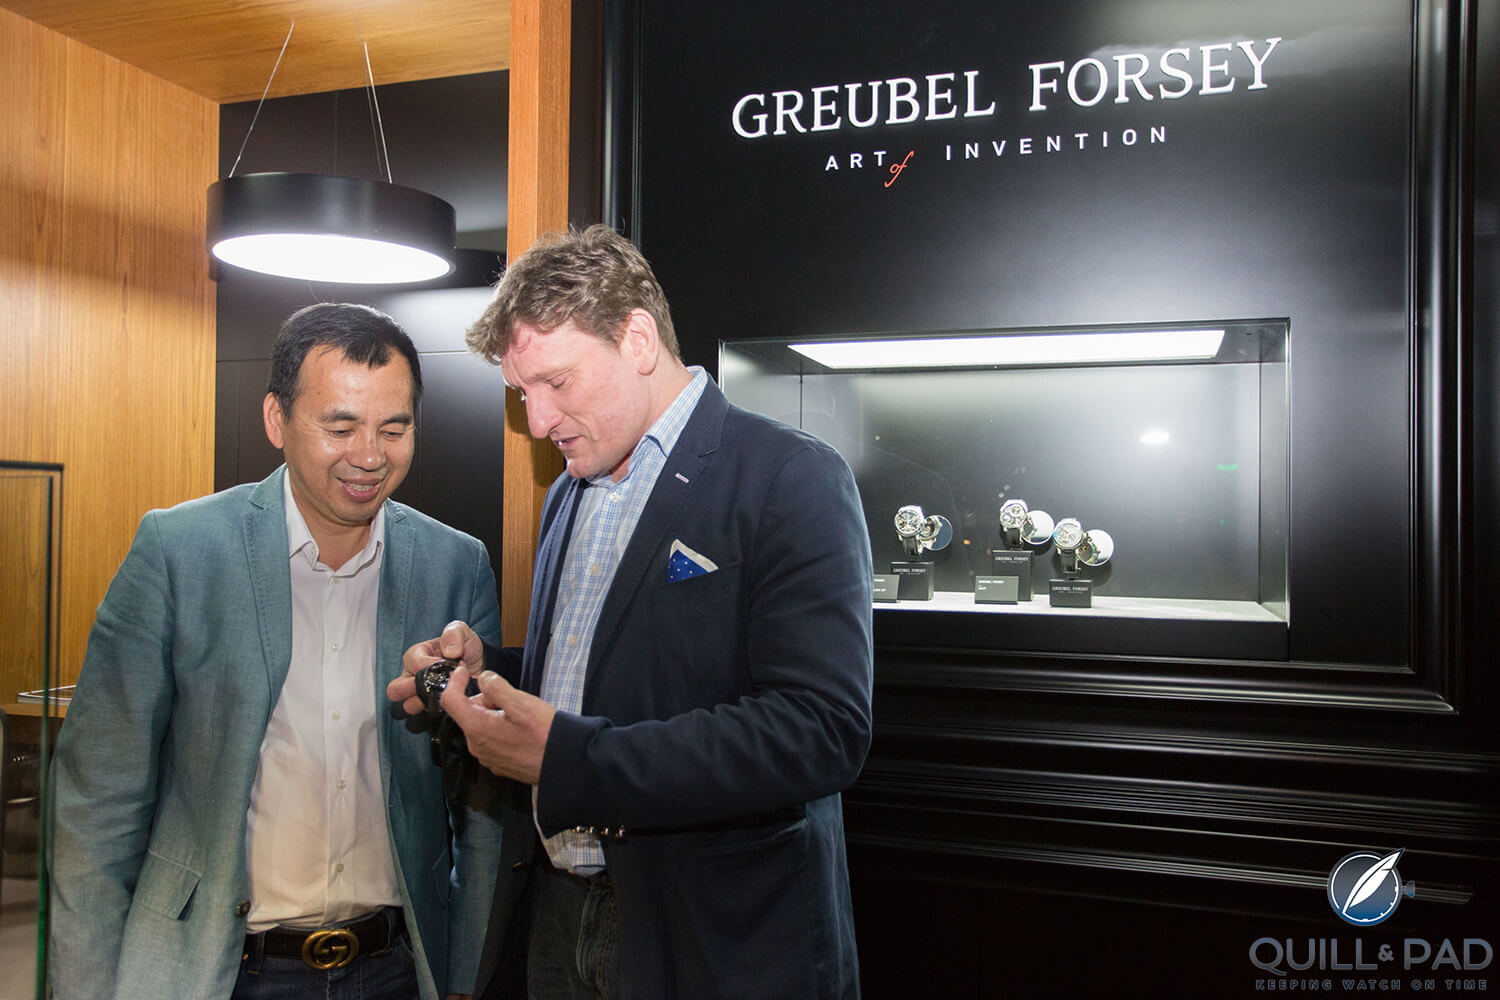 Stephen Forsey sharing some time and knowledge with an appreciative visitor at the Greubel Forsey stand at Dubai Watch Week